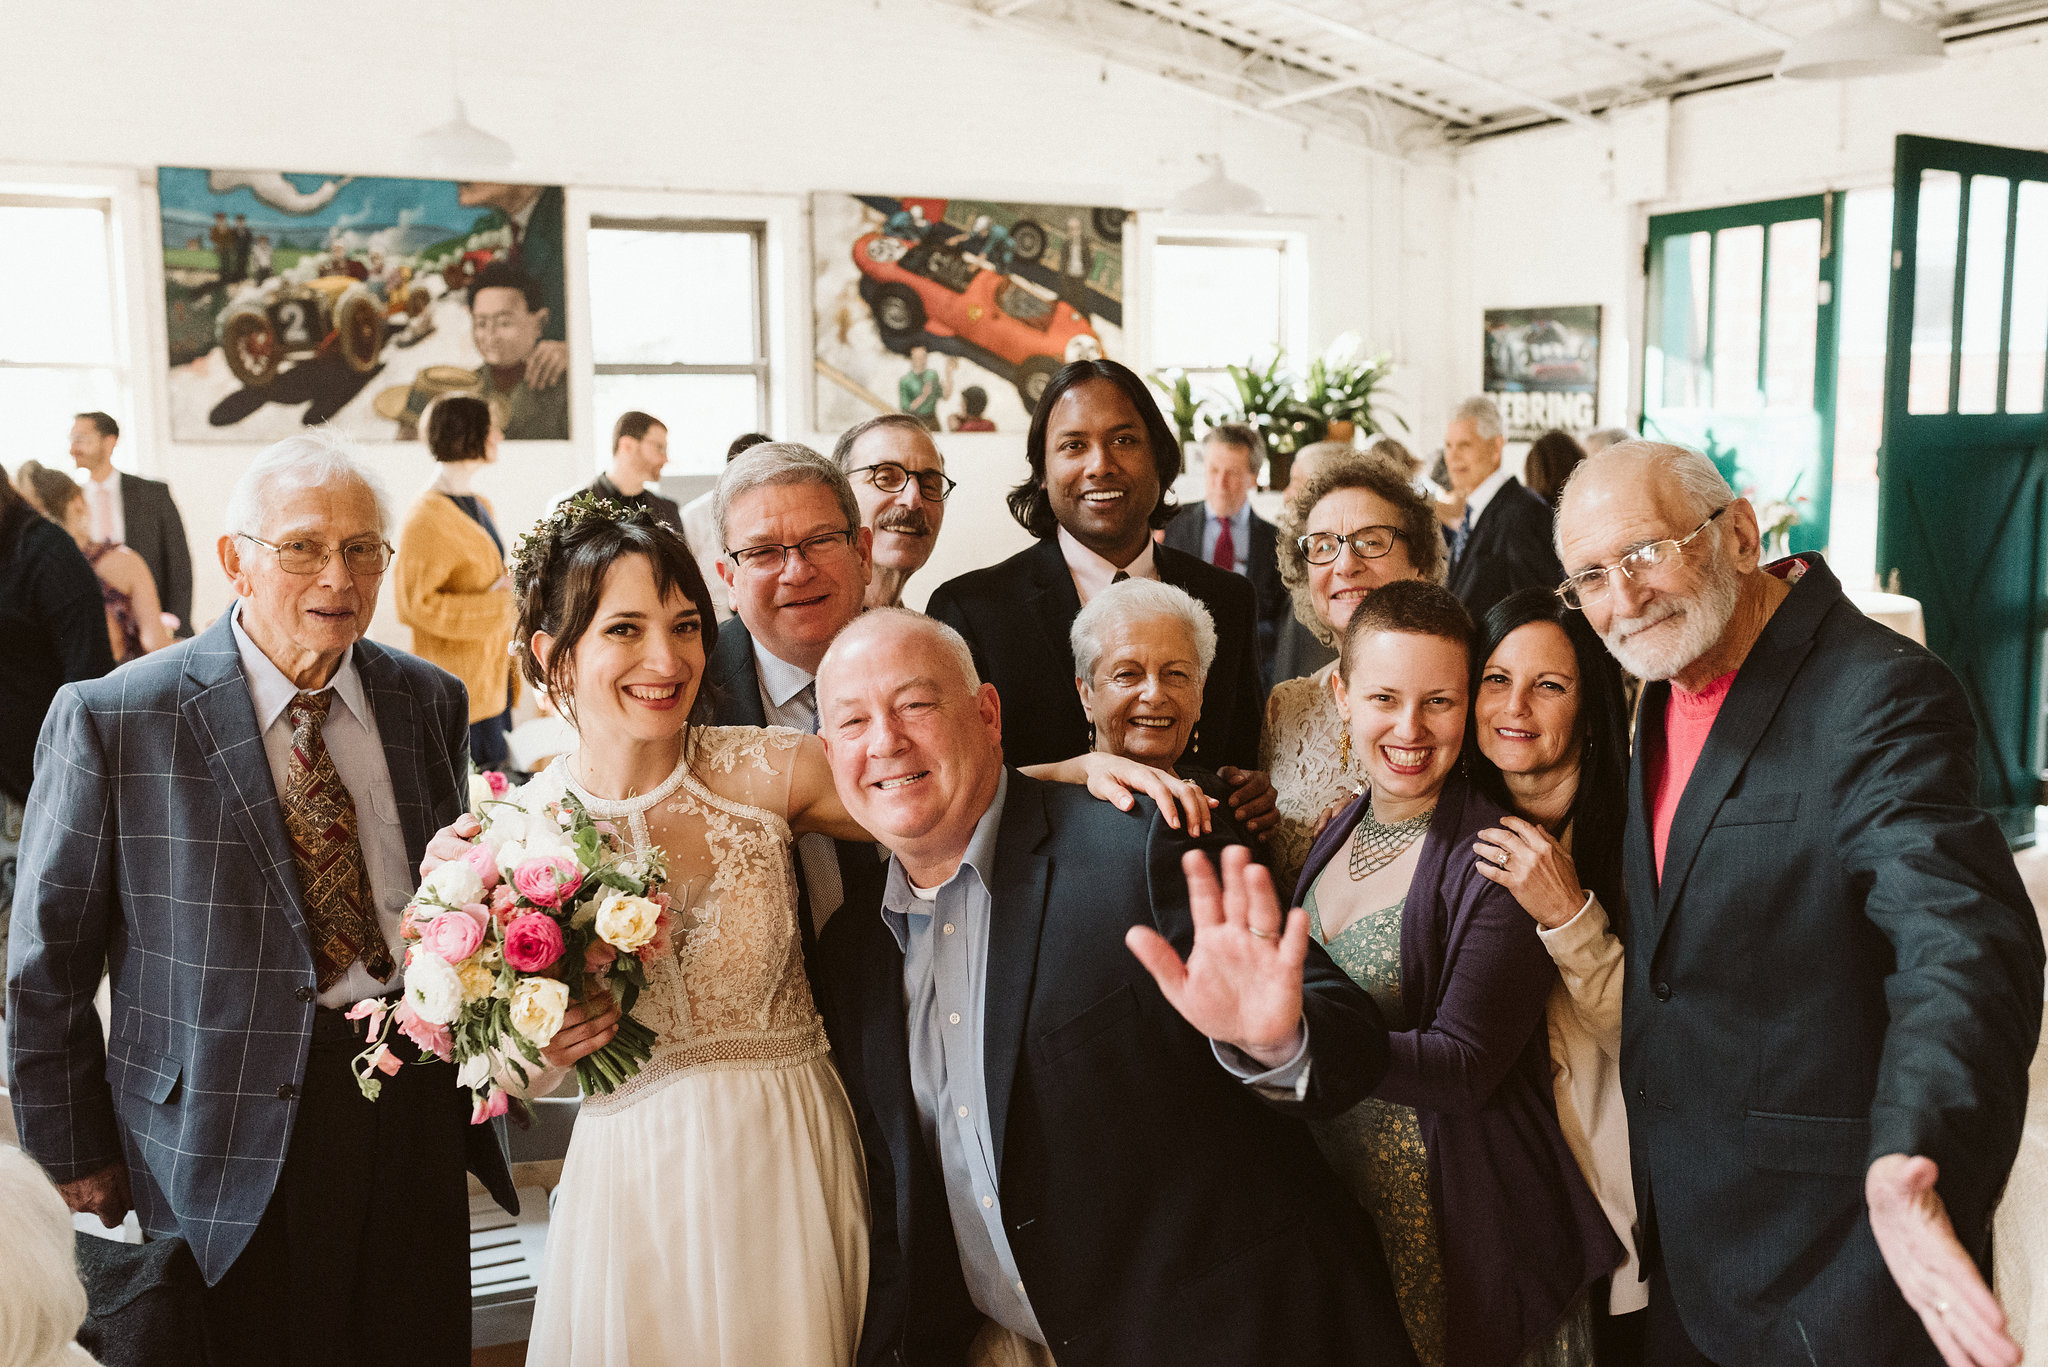  Baltimore, Maryland Wedding Photographer, Hampden, Eco-Friendly, Green, The Elm, Simple and Classic, Vintage, Portrait of Bride with Friends and Family at Reception, La Vie En Blanc 